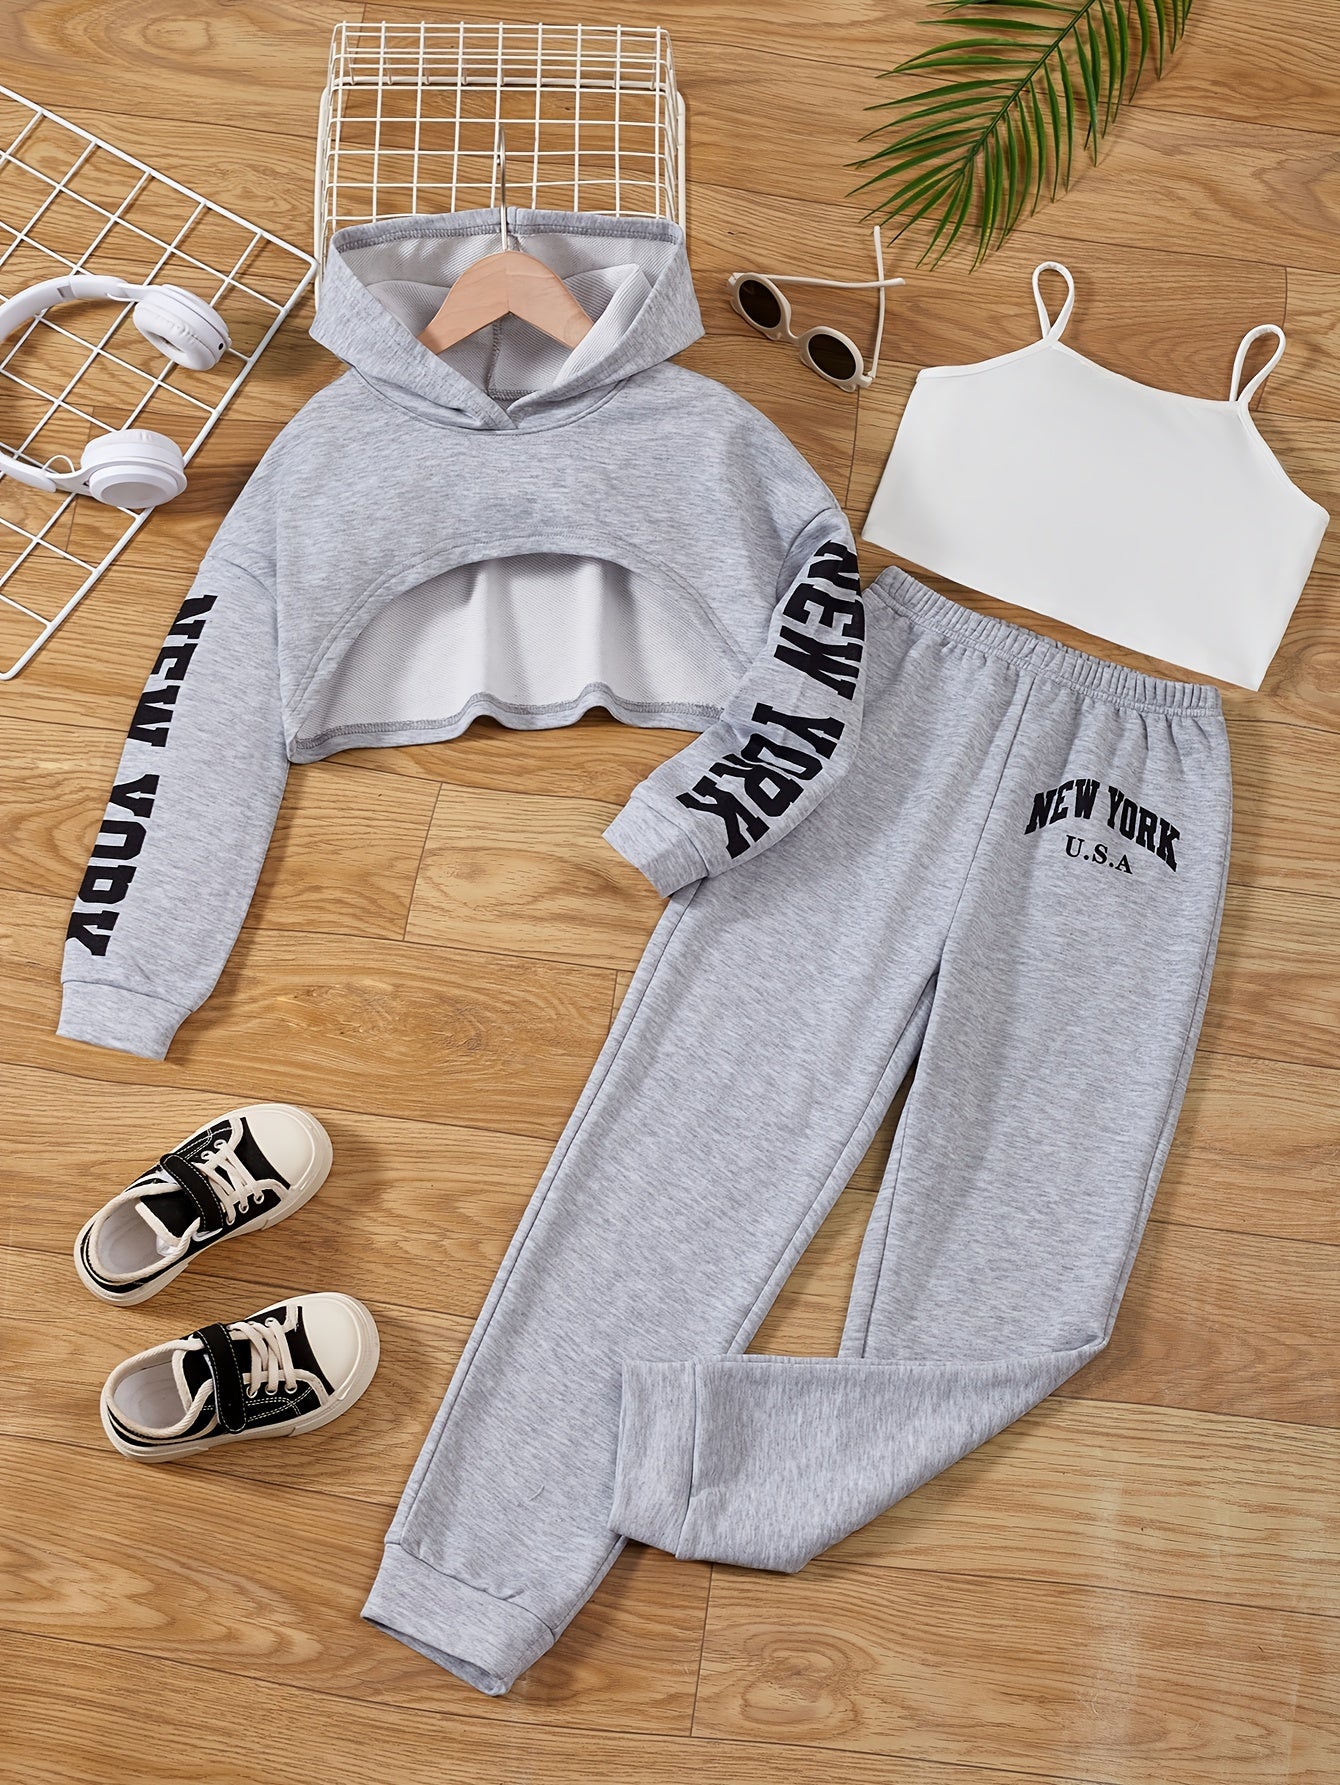 3pcs Girl's Trendy Outfit, Crop Hoodie & Cami Top & Sweatpants Set, NEW YORK Print Casual Long Sleeve Top, Kid's Clothes For Spring Fall Winter